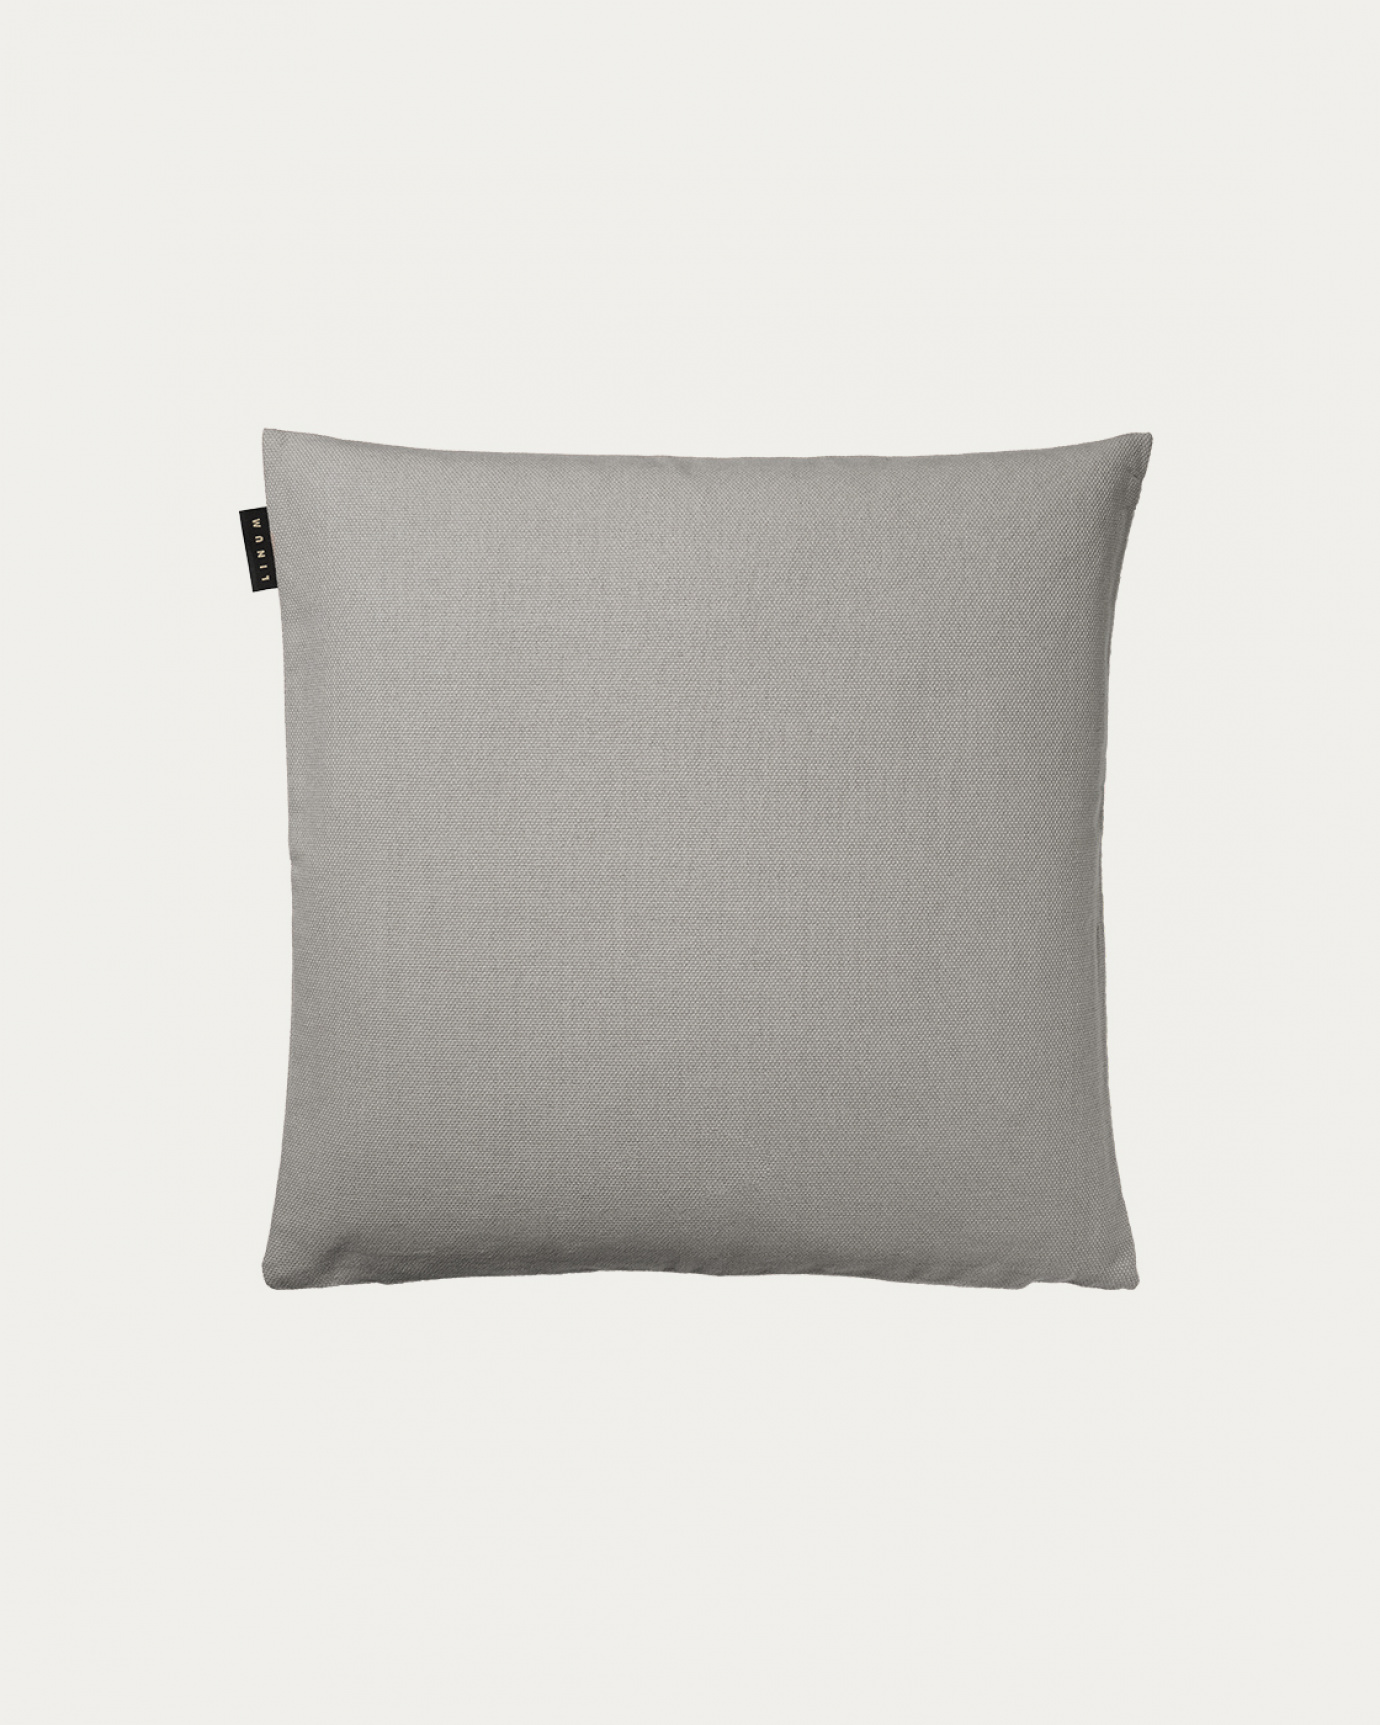 Product image light grey PEPPER cushion cover made of soft cotton from LINUM DESIGN. Easy to wash and durable for generations. Size 40x40 cm.